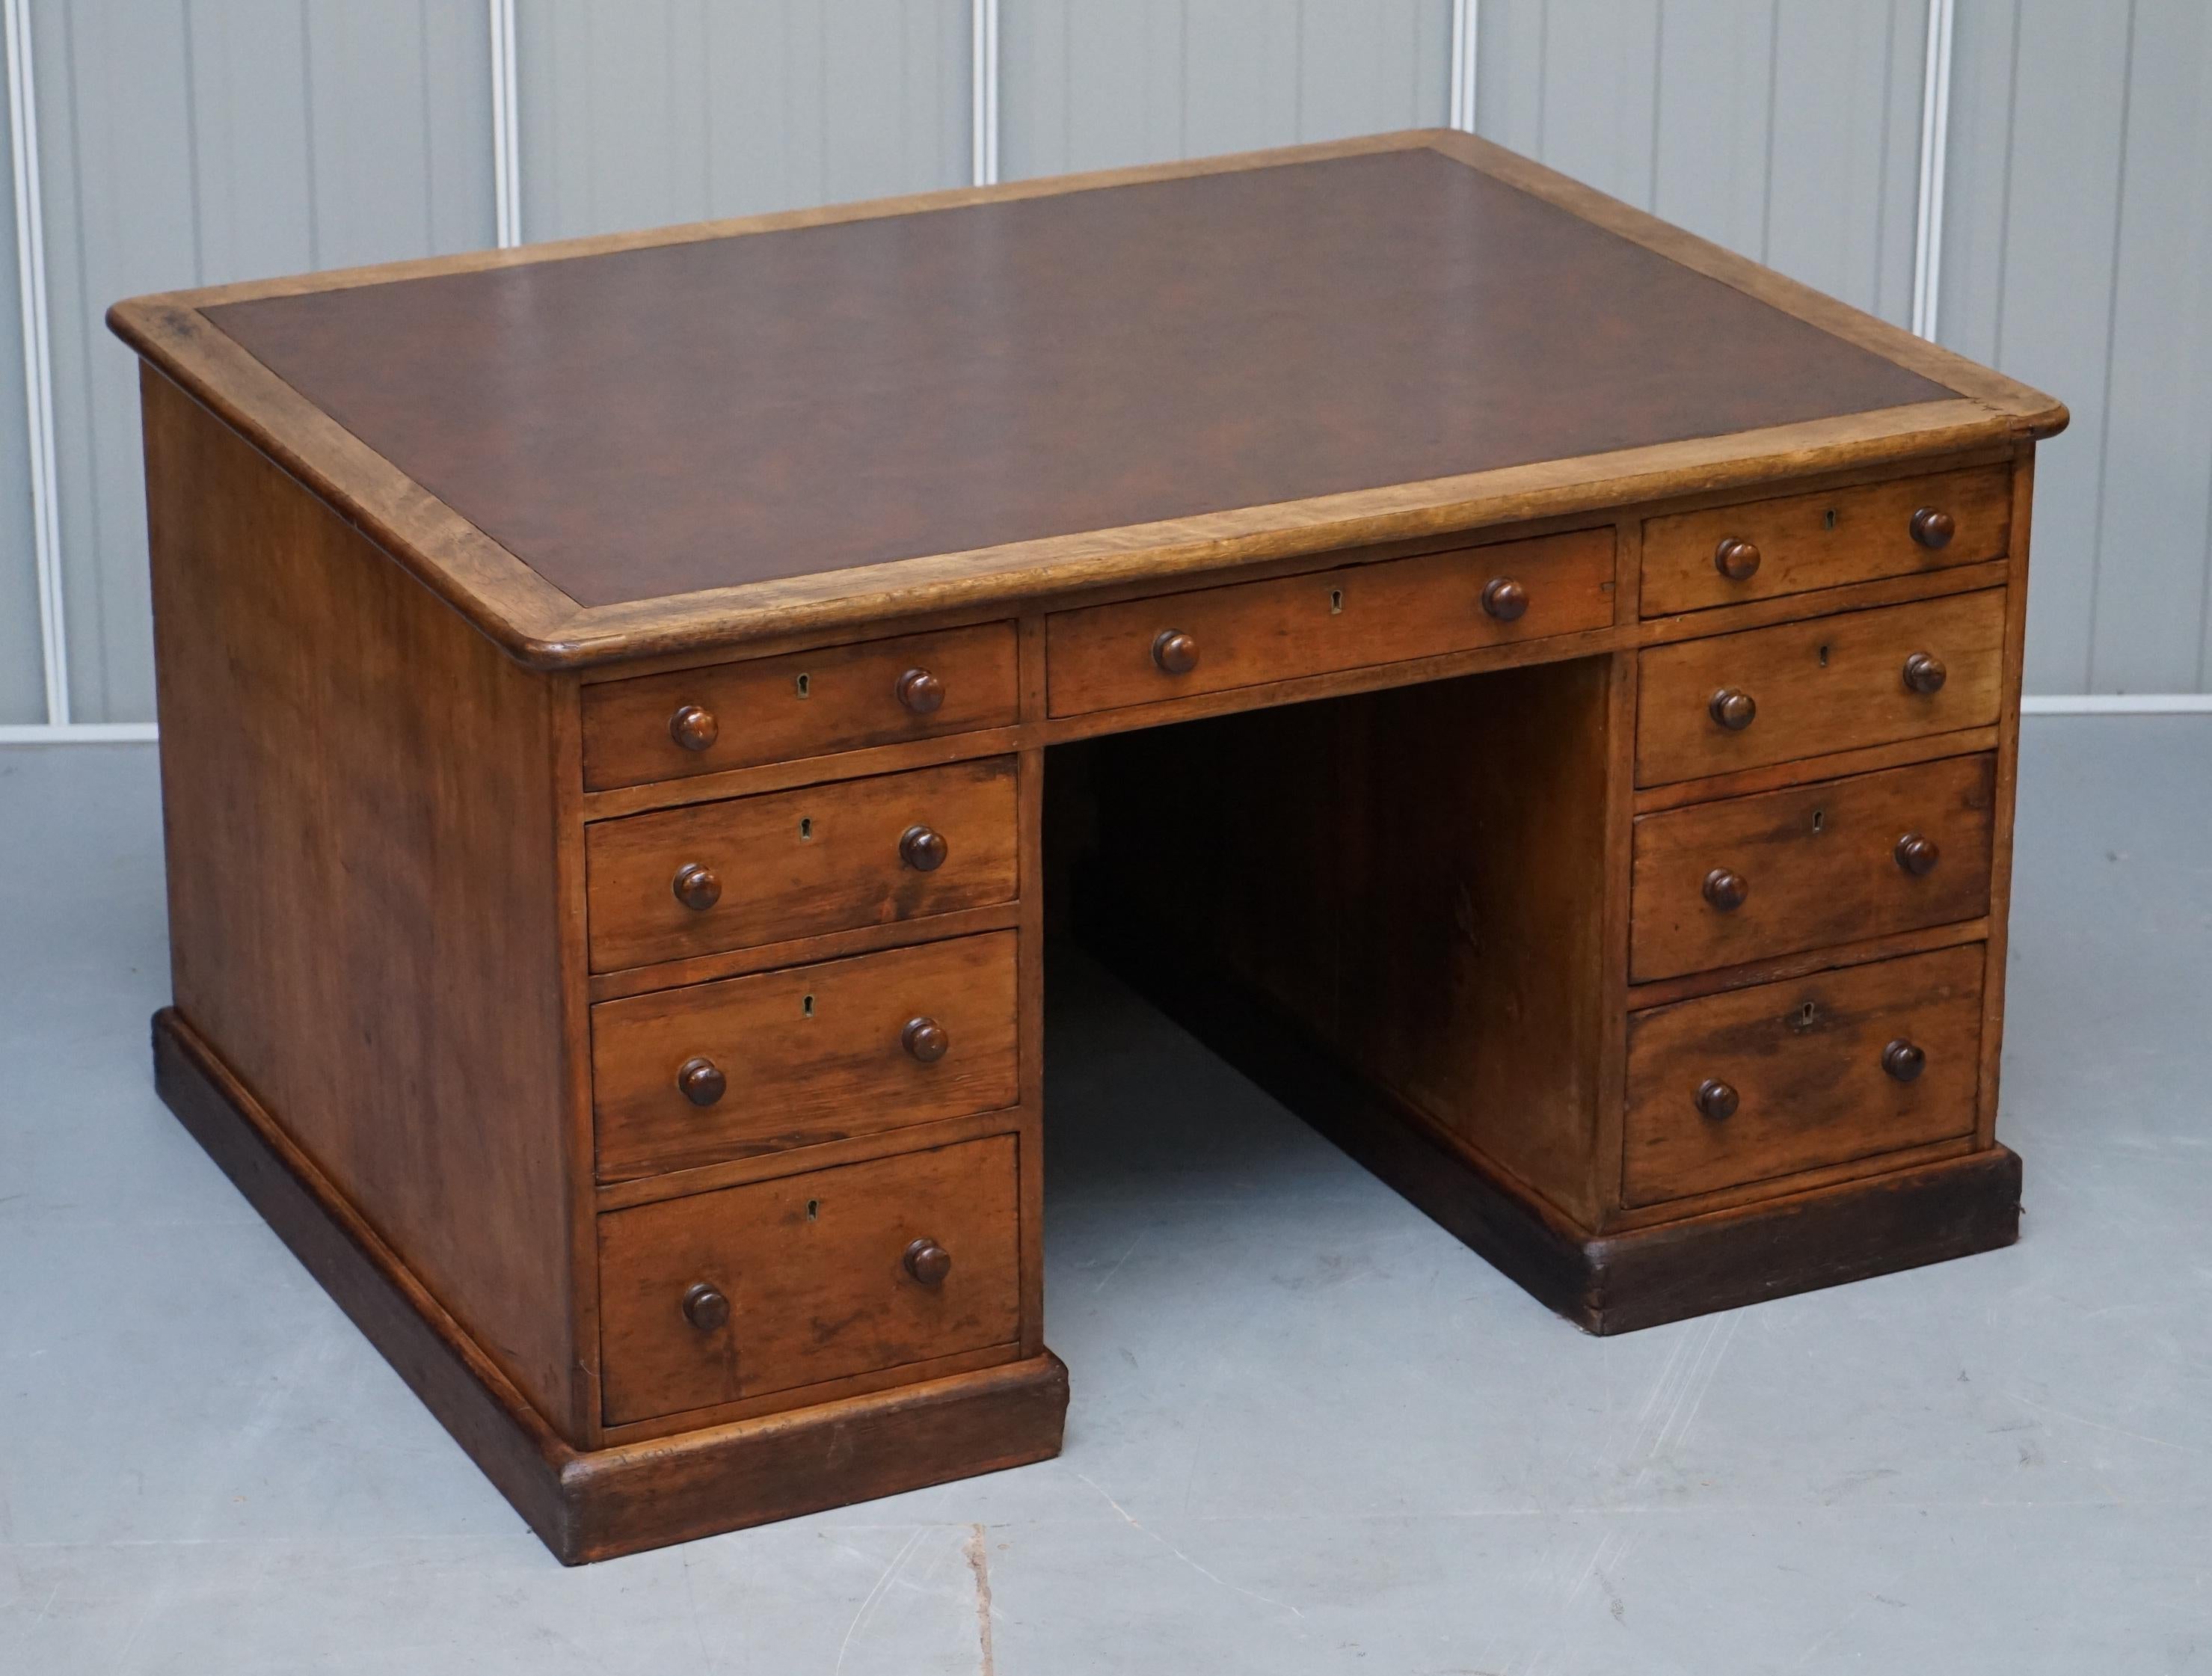 We are delighted to offer for sale this absolutely stunning circa 1880 Victorian English oak antique knee hole 18 drawer desk

A wonderful desk, really very substantial and rare to find with the full nine drawers on both sides, usually they have